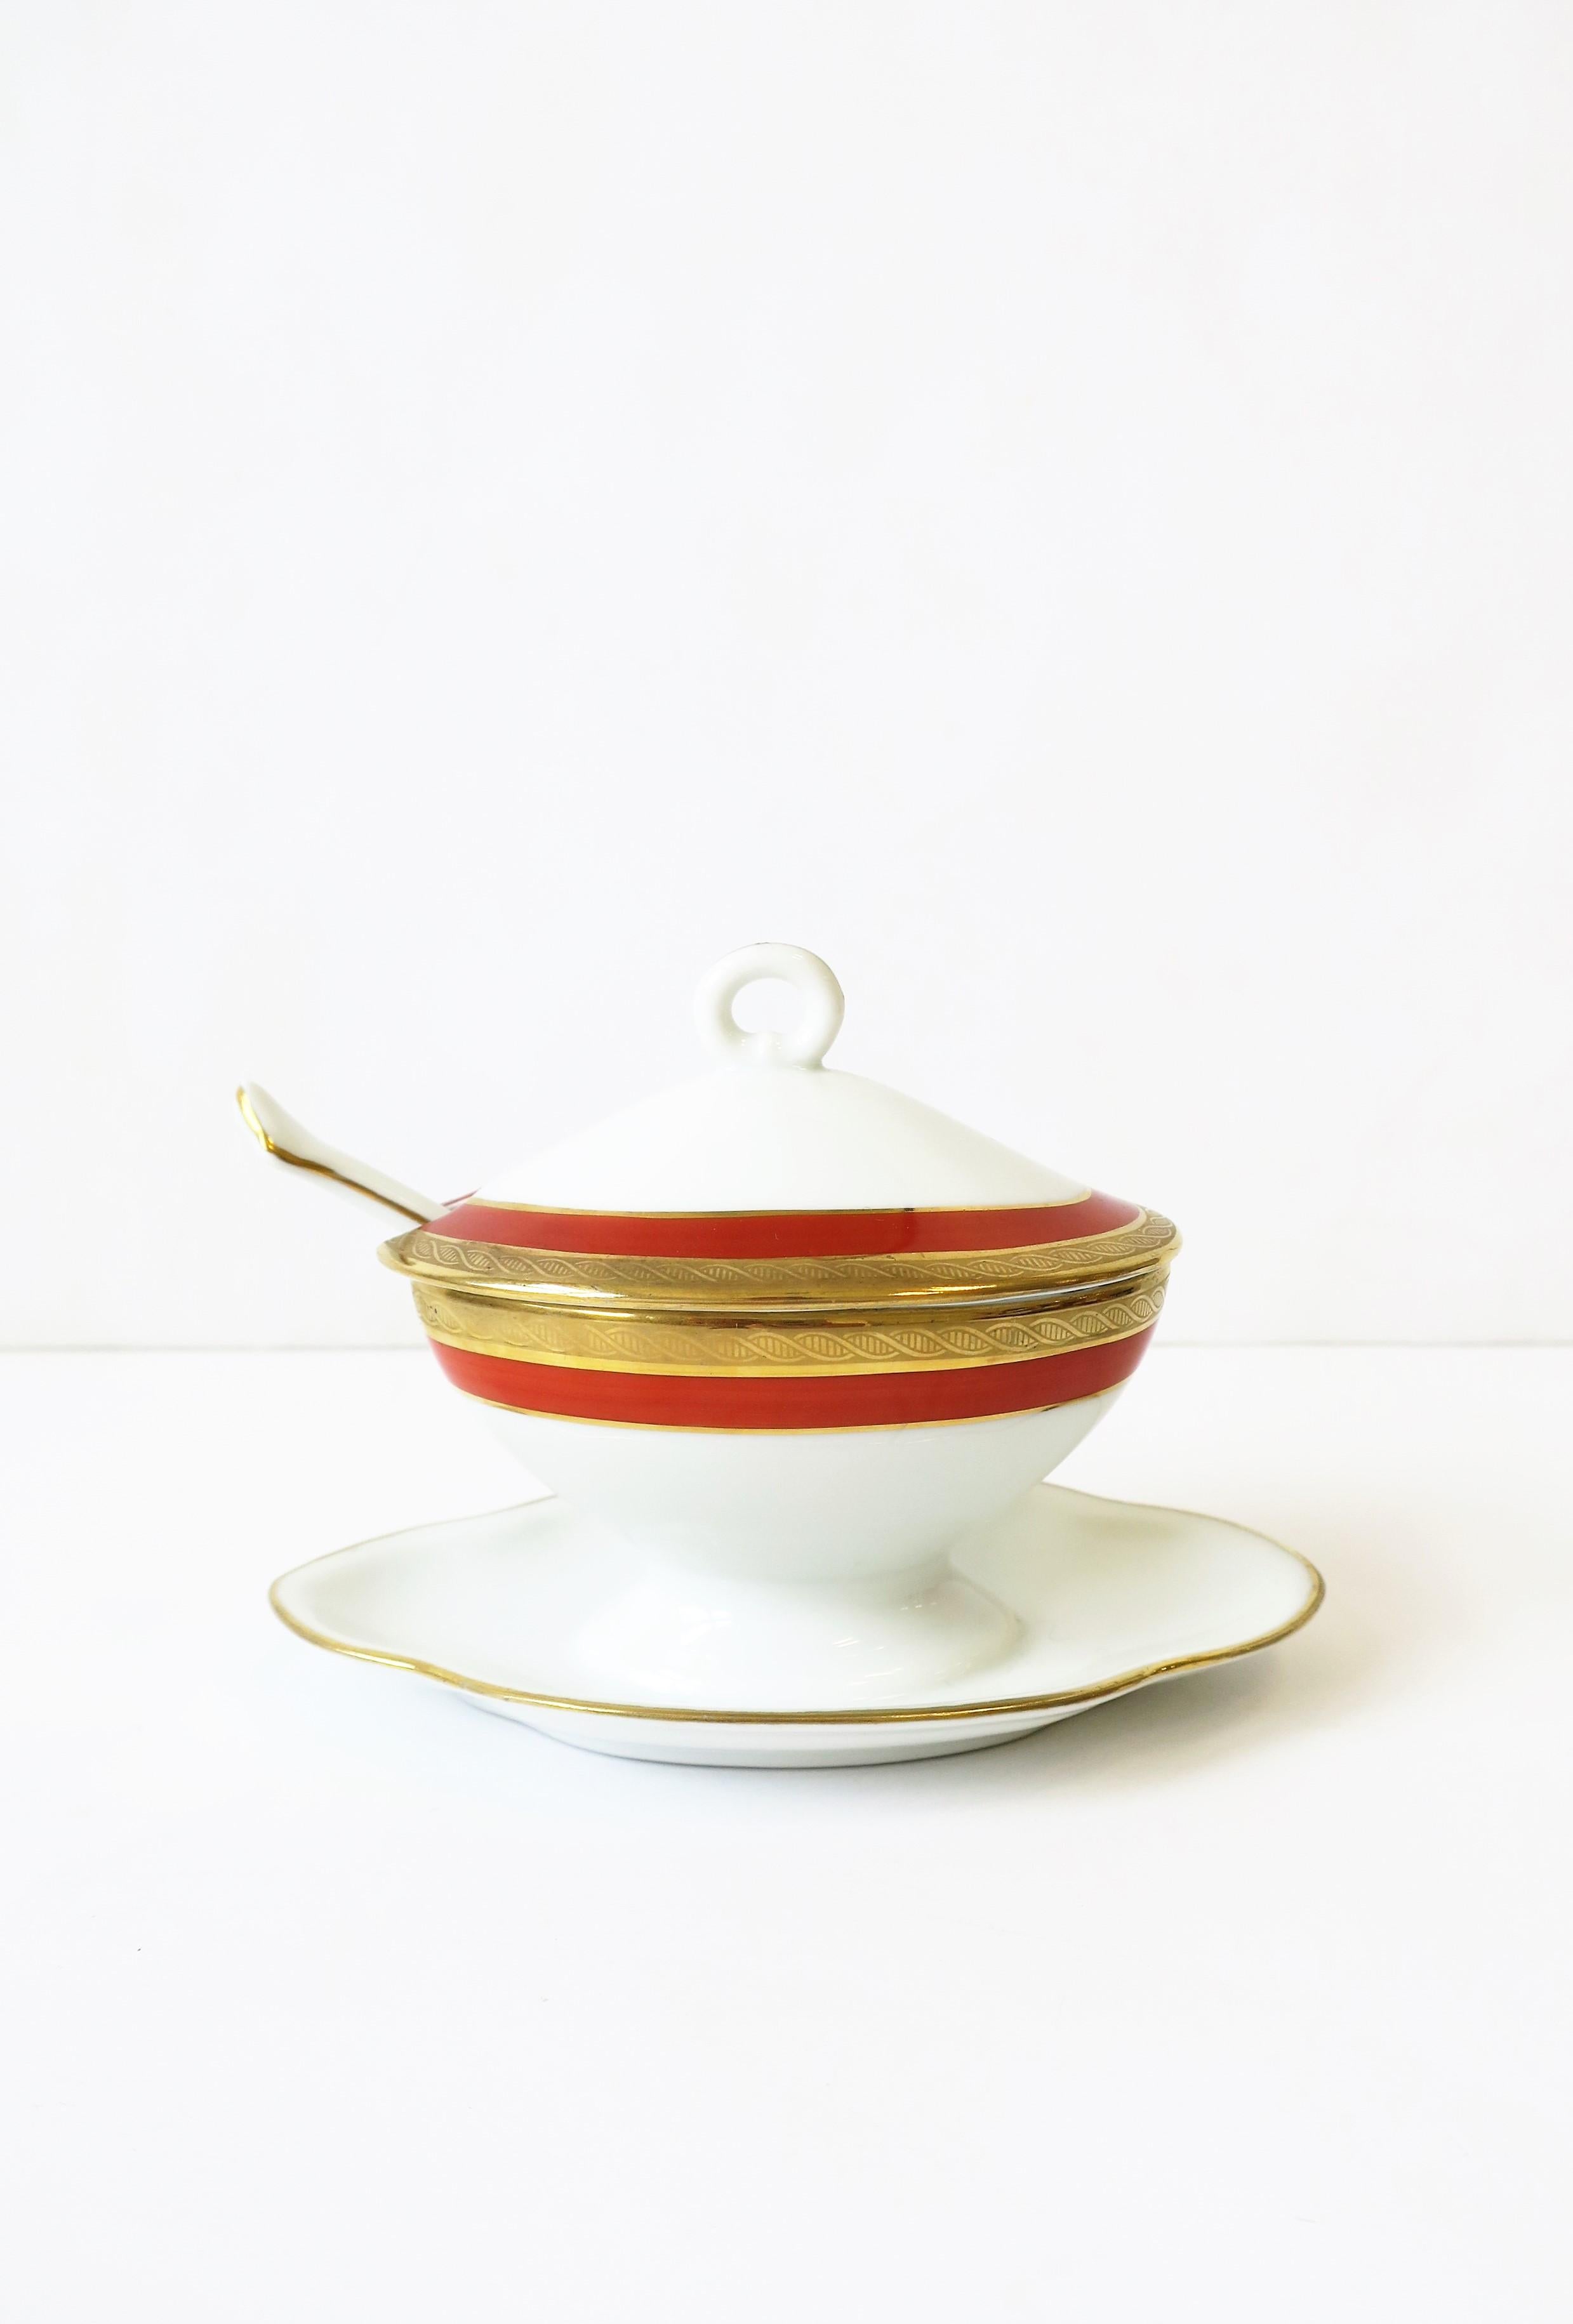 A beautiful vintage Italian white and gold porcelain condiments dish or vessel with lid and spoon by designer Richard Ginori, circa mid-20th century, Italy. Lid has loop handle detail for easy lifting, and spoon is perfect for serving small amounts,